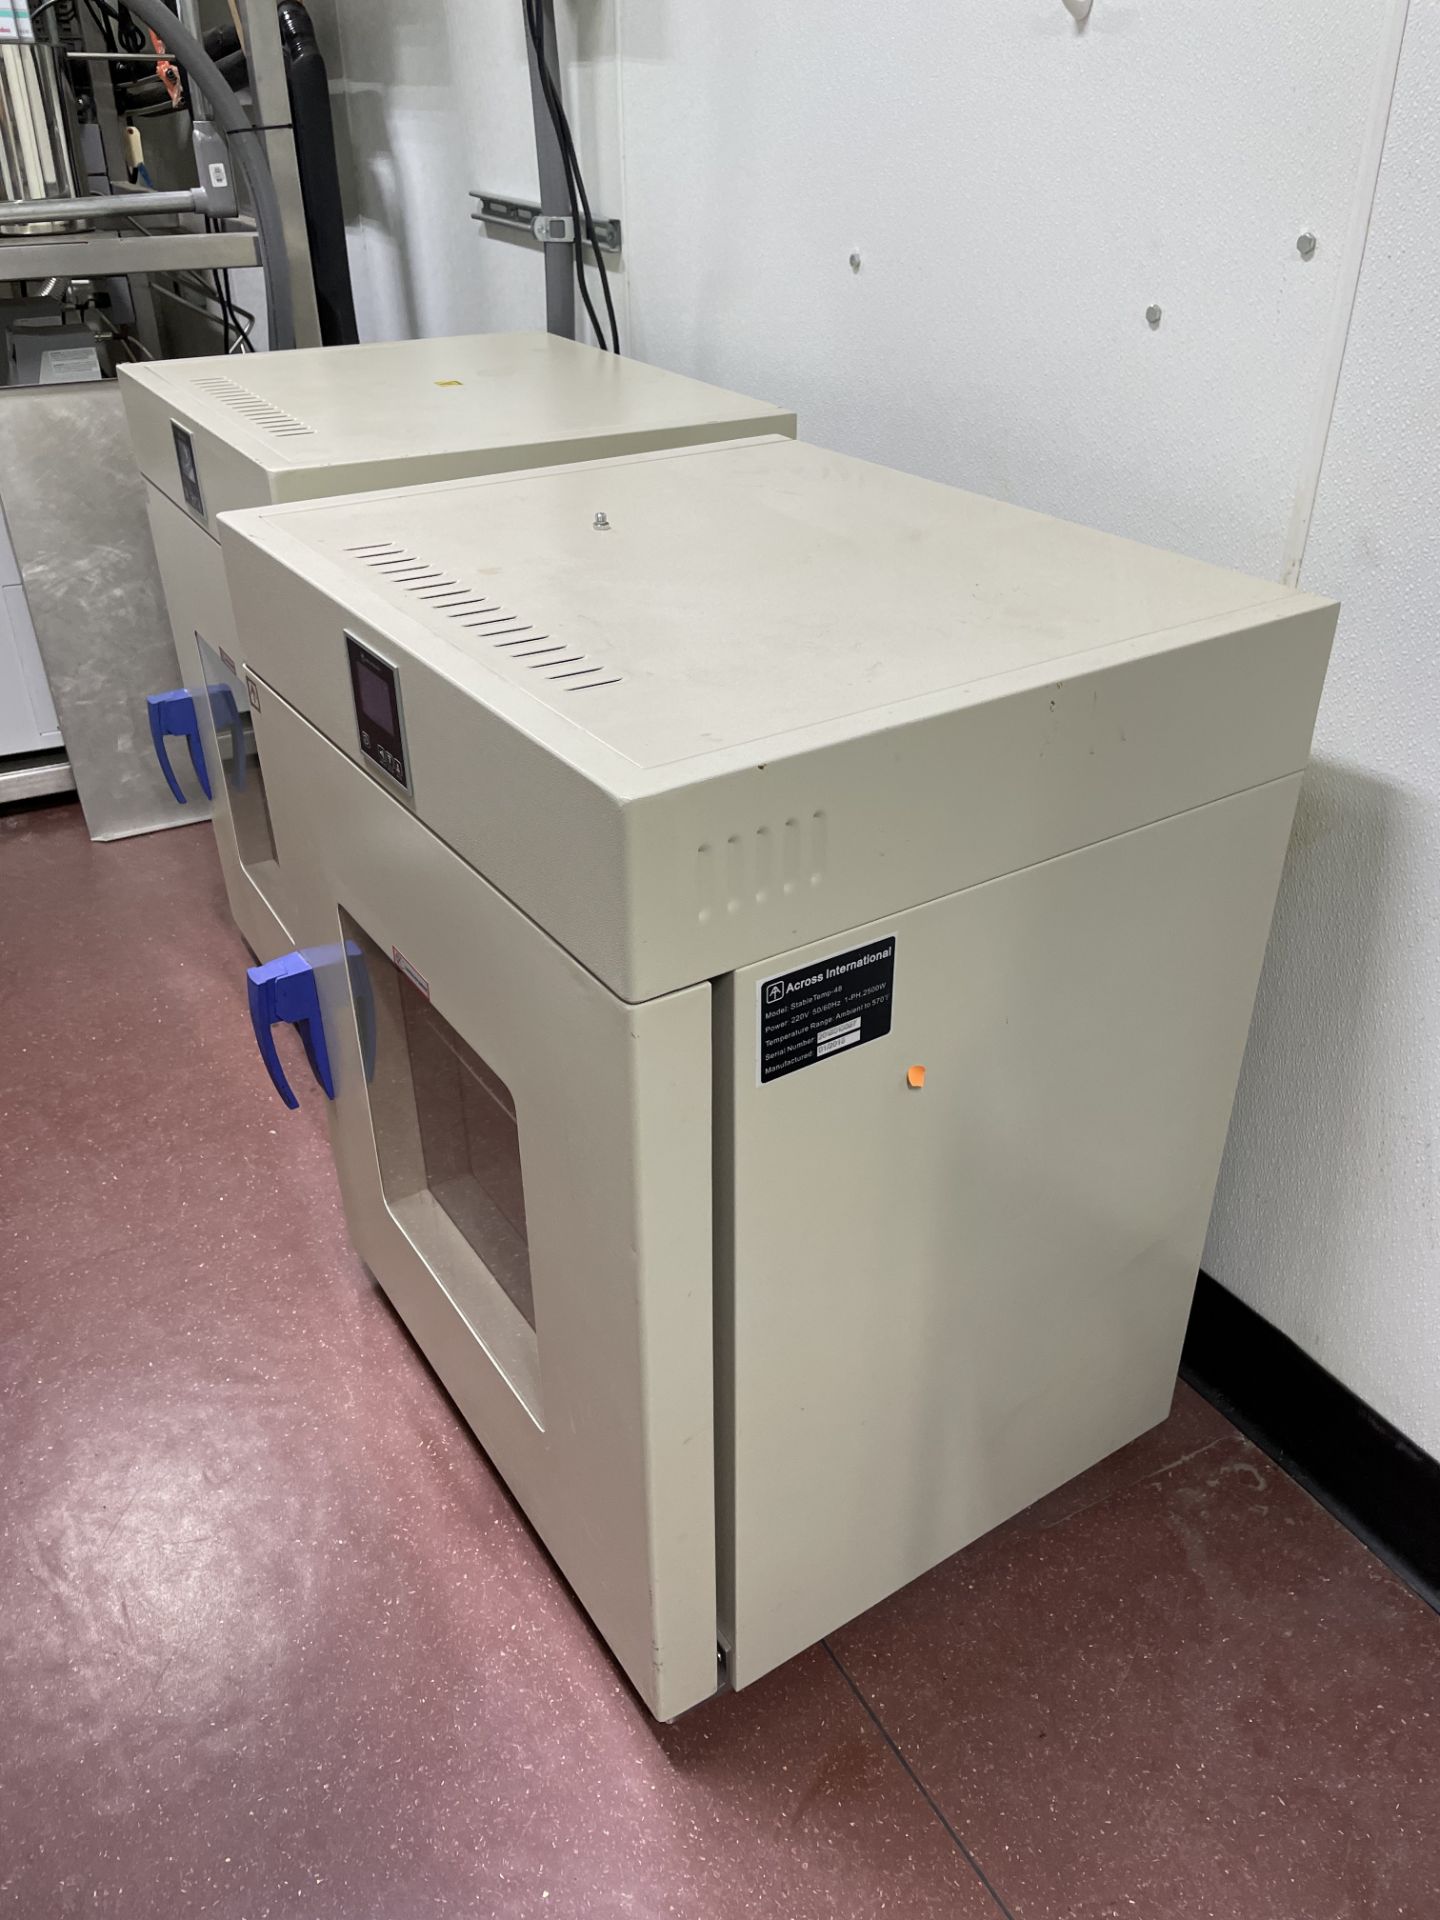 Lot of (2) Used Across International Stable Temp 48 Convection Ovens. Both 220V - Image 10 of 12